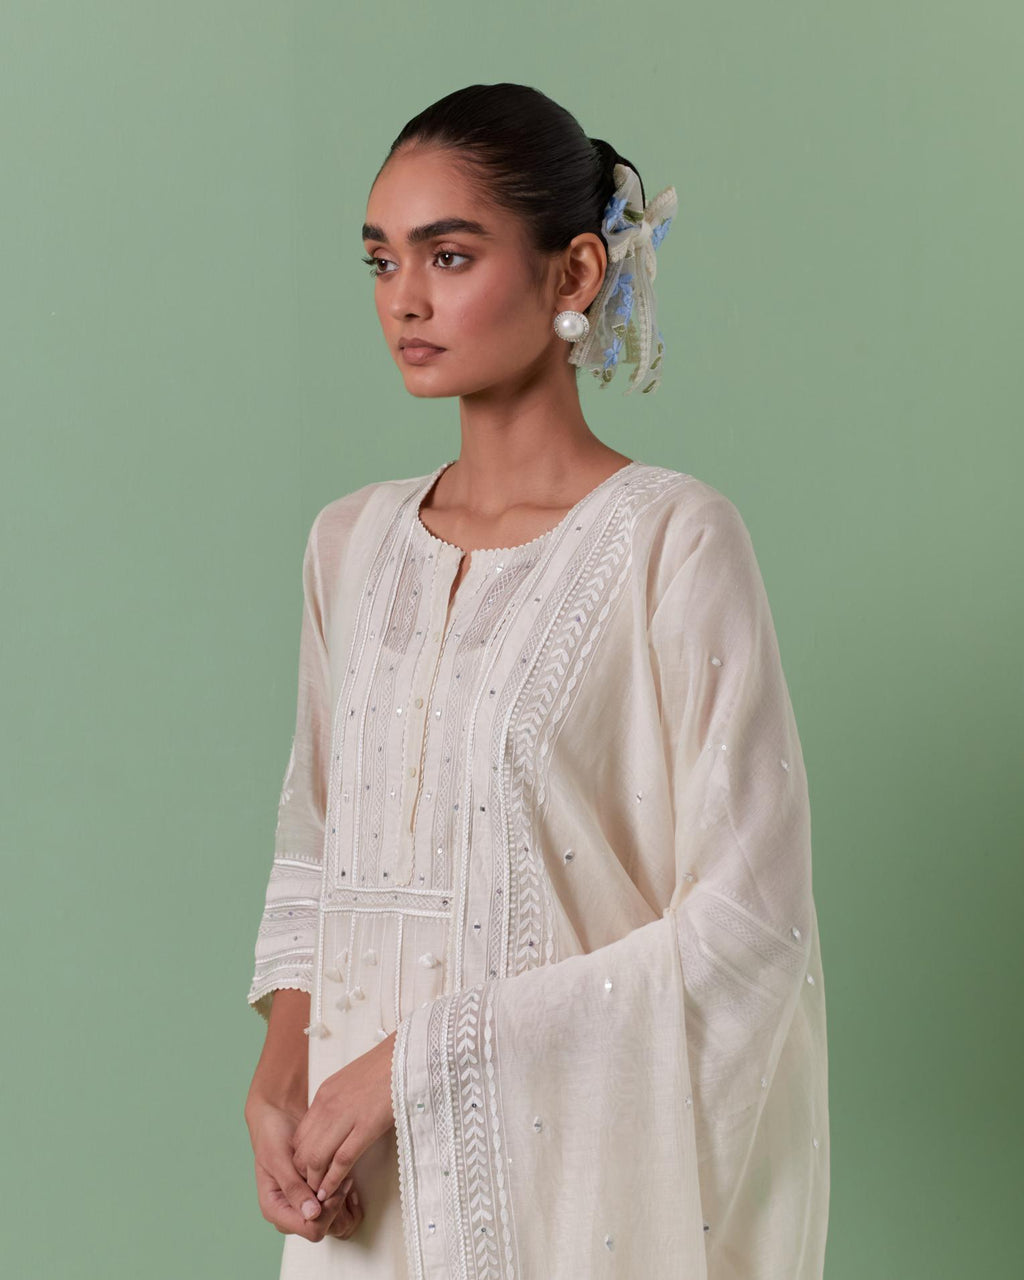 Off-white cotton chanderi dupatta with delicate silk thread embroidery, highlighted with braids, mirrors and sequins.